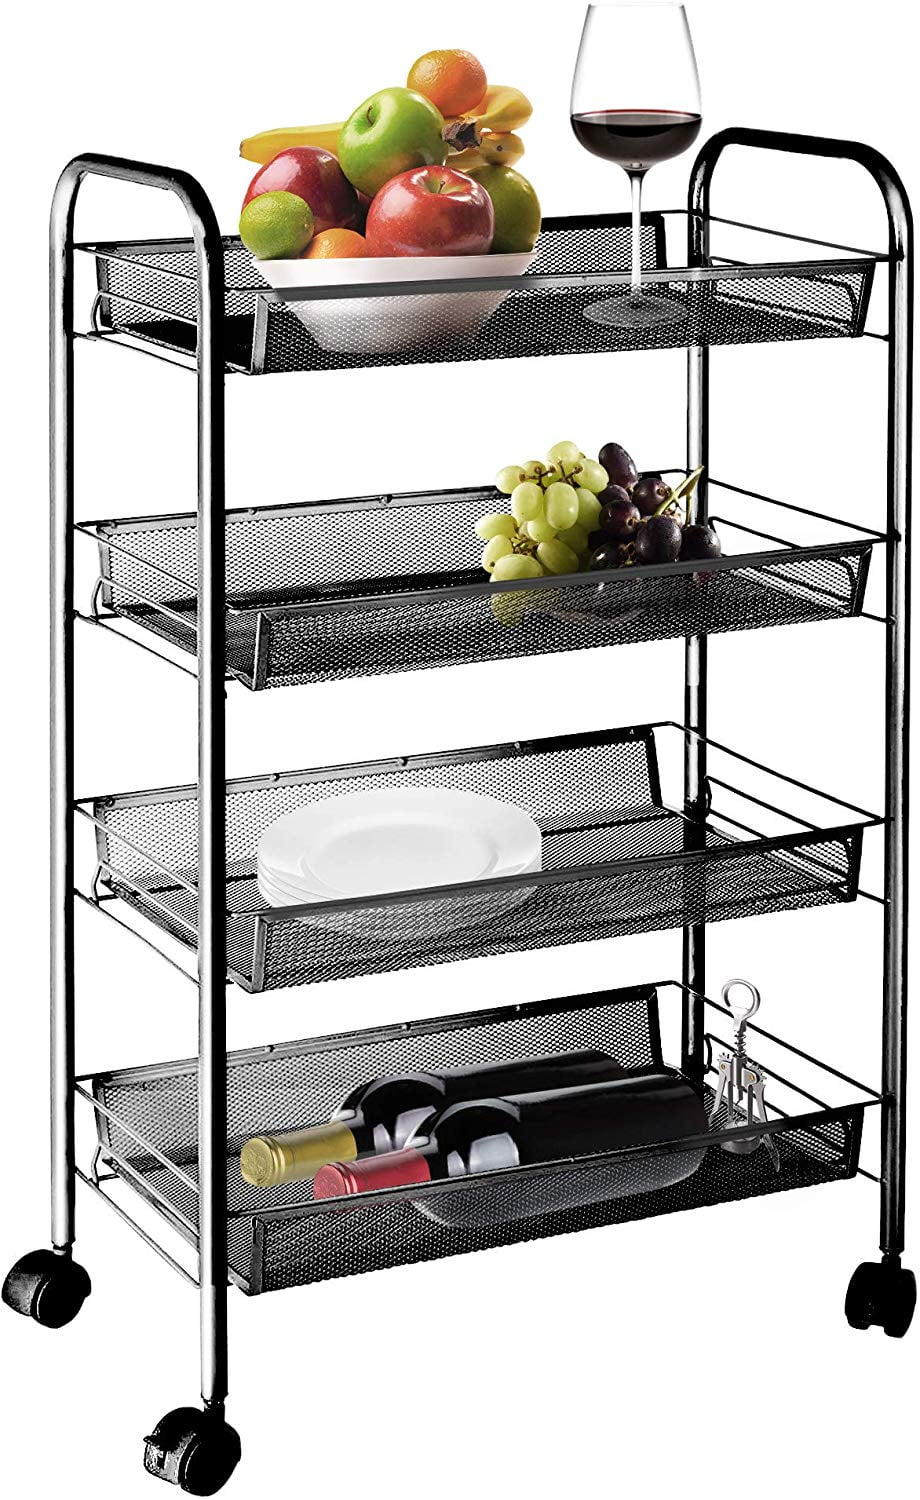 White Mobile Shelving with 4 Mesh Wire Storage Baskets Easy Assembly Storage Cart for Kitchen Laundry Room Bathroom Office & Dresser 【US Fast Shipment】4-Tier Rolling Utility Cart 